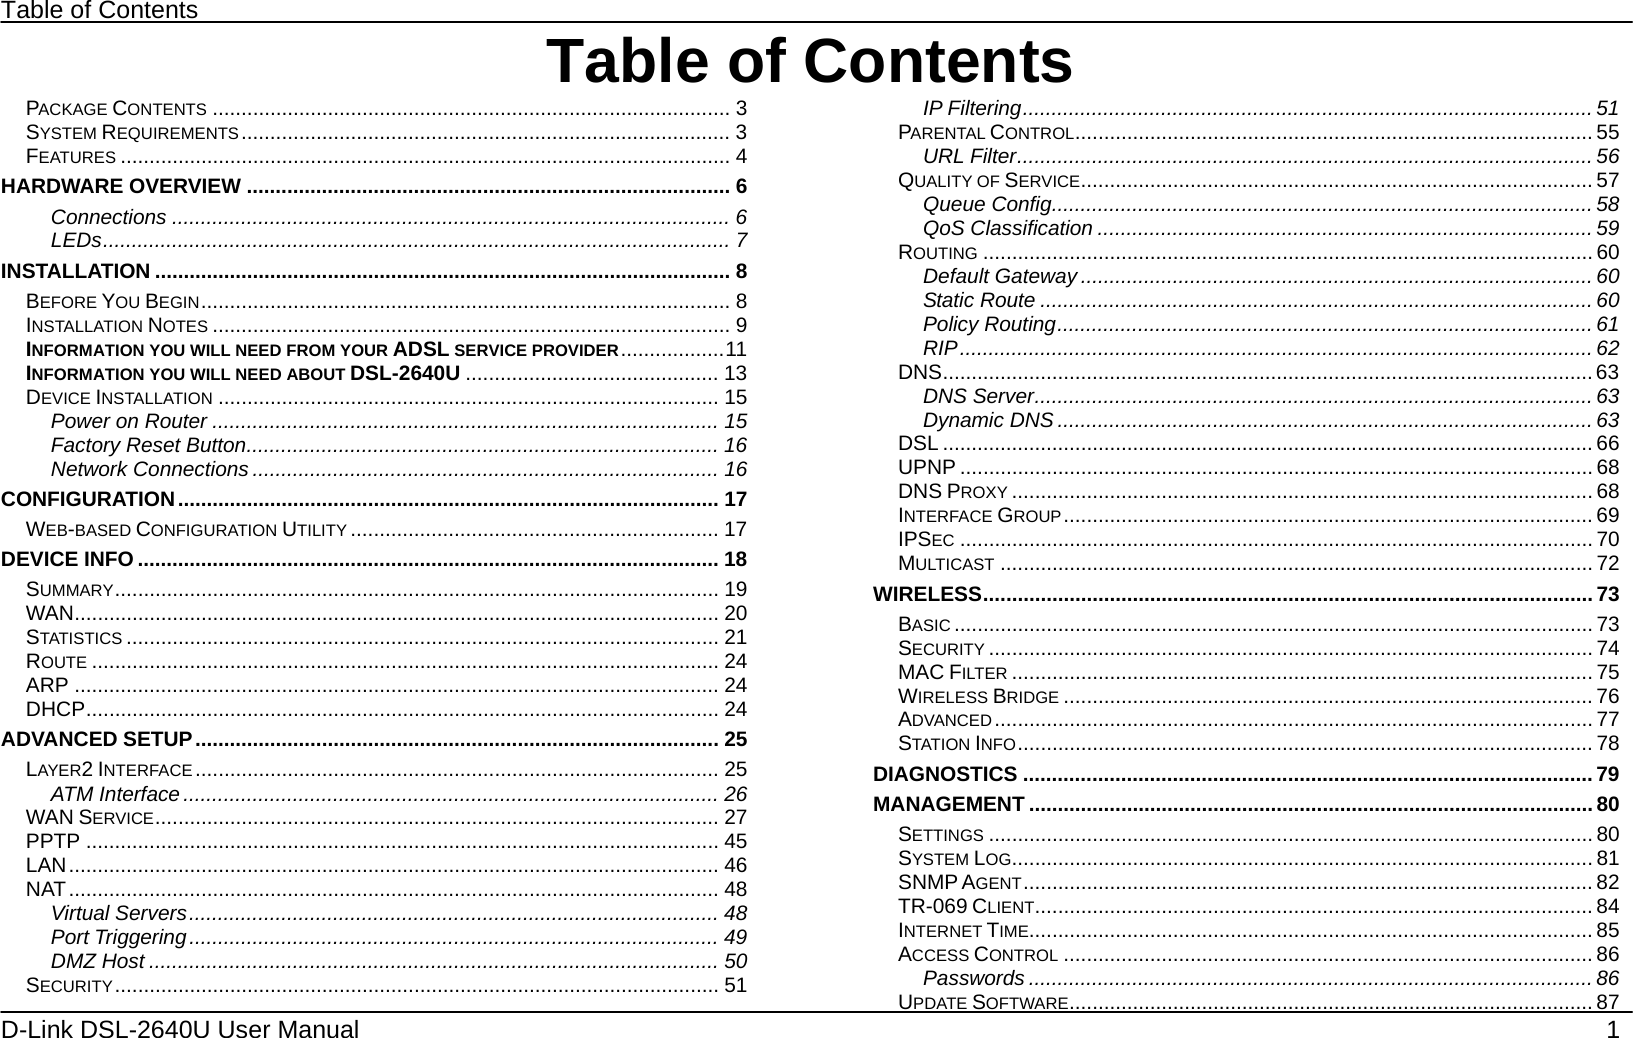 Table of Contents D-Link DSL-2640U User Manual    1 Table of ContentsPACKAGE CONTENTS .......................................................................................... 3 SYSTEM REQUIREMENTS..................................................................................... 3 FEATURES .......................................................................................................... 4 HARDWARE OVERVIEW .................................................................................... 6 Connections ................................................................................................. 6 LEDs............................................................................................................. 7 INSTALLATION .................................................................................................... 8 BEFORE YOU BEGIN............................................................................................ 8 INSTALLATION NOTES .......................................................................................... 9 INFORMATION YOU WILL NEED FROM YOUR ADSL SERVICE PROVIDER..................11 INFORMATION YOU WILL NEED ABOUT DSL-2640U ............................................ 13 DEVICE INSTALLATION ....................................................................................... 15 Power on Router ........................................................................................ 15 Factory Reset Button.................................................................................. 16 Network Connections ................................................................................. 16 CONFIGURATION.............................................................................................. 17 WEB-BASED CONFIGURATION UTILITY ................................................................ 17 DEVICE INFO ..................................................................................................... 18 SUMMARY......................................................................................................... 19 WAN................................................................................................................ 20 STATISTICS ....................................................................................................... 21 ROUTE ............................................................................................................. 24 ARP ................................................................................................................ 24 DHCP.............................................................................................................. 24 ADVANCED SETUP........................................................................................... 25 LAYER2 INTERFACE ........................................................................................... 25 ATM Interface ............................................................................................. 26 WAN SERVICE.................................................................................................. 27 PPTP .............................................................................................................. 45 LAN................................................................................................................. 46 NAT................................................................................................................. 48 Virtual Servers............................................................................................ 48 Port Triggering............................................................................................ 49 DMZ Host ................................................................................................... 50 SECURITY......................................................................................................... 51 IP Filtering................................................................................................... 51 PARENTAL CONTROL.......................................................................................... 55 URL Filter.................................................................................................... 56 QUALITY OF SERVICE......................................................................................... 57 Queue Config.............................................................................................. 58 QoS Classification ...................................................................................... 59 ROUTING .......................................................................................................... 60 Default Gateway ......................................................................................... 60 Static Route ................................................................................................ 60 Policy Routing............................................................................................. 61 RIP.............................................................................................................. 62 DNS................................................................................................................. 63 DNS Server.................................................................................................63 Dynamic DNS ............................................................................................. 63 DSL ................................................................................................................. 66 UPNP .............................................................................................................. 68 DNS PROXY ..................................................................................................... 68 INTERFACE GROUP............................................................................................ 69 IPSEC .............................................................................................................. 70 MULTICAST ....................................................................................................... 72 WIRELESS.......................................................................................................... 73 BASIC ............................................................................................................... 73 SECURITY ......................................................................................................... 74 MAC FILTER ..................................................................................................... 75 WIRELESS BRIDGE ............................................................................................ 76 ADVANCED ........................................................................................................ 77 STATION INFO.................................................................................................... 78 DIAGNOSTICS ................................................................................................... 79 MANAGEMENT .................................................................................................. 80 SETTINGS ......................................................................................................... 80 SYSTEM LOG..................................................................................................... 81 SNMP AGENT................................................................................................... 82 TR-069 CLIENT................................................................................................. 84 INTERNET TIME.................................................................................................. 85 ACCESS CONTROL ............................................................................................ 86 Passwords .................................................................................................. 86 UPDATE SOFTWARE........................................................................................... 87 